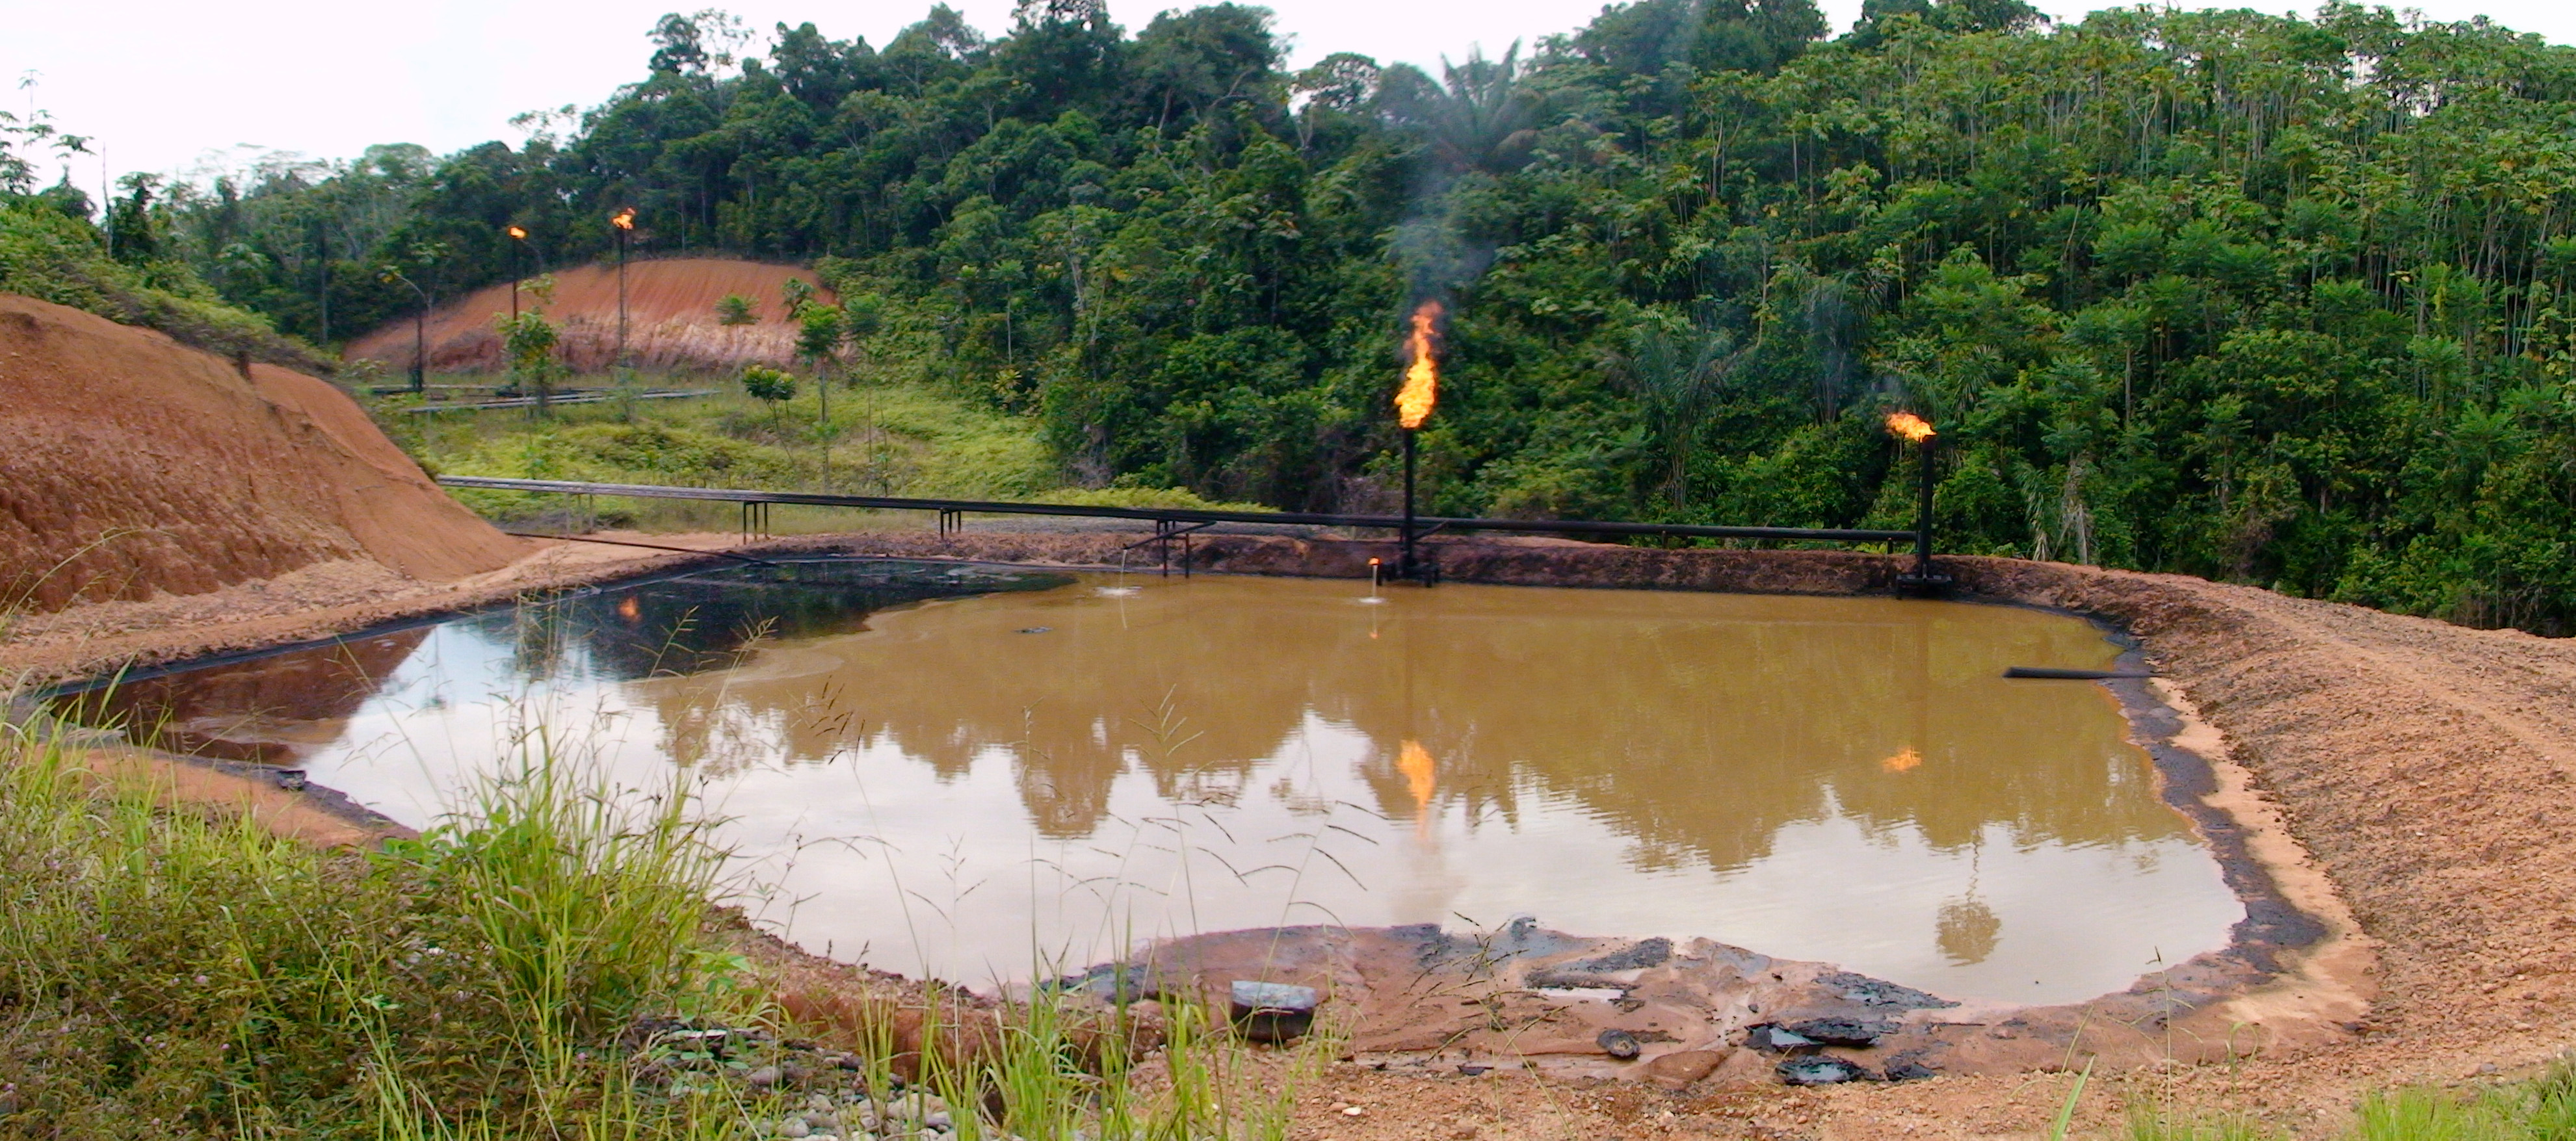 Gas flare over waste oil and water pit